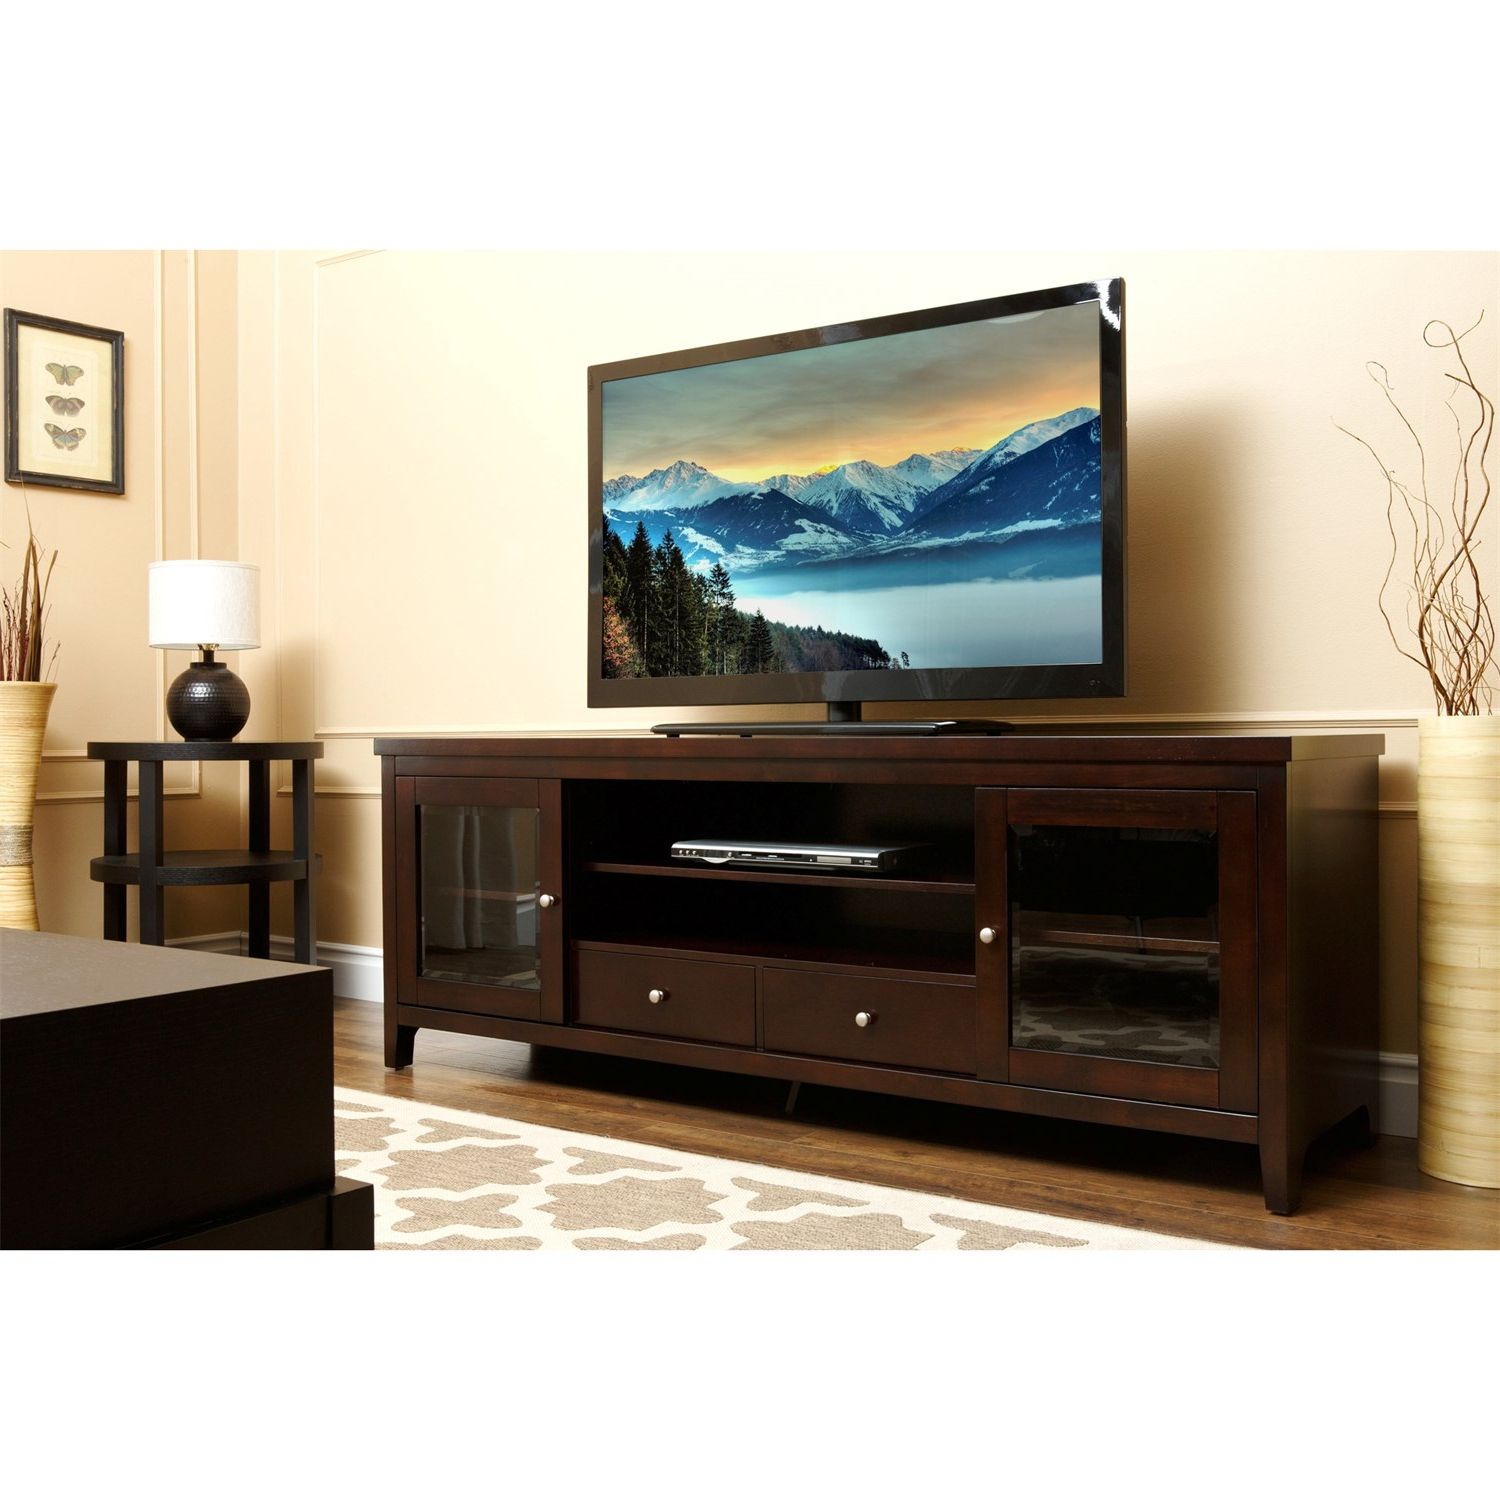 Square Tv Stands For Most Popular Tv Stands (View 15 of 20)